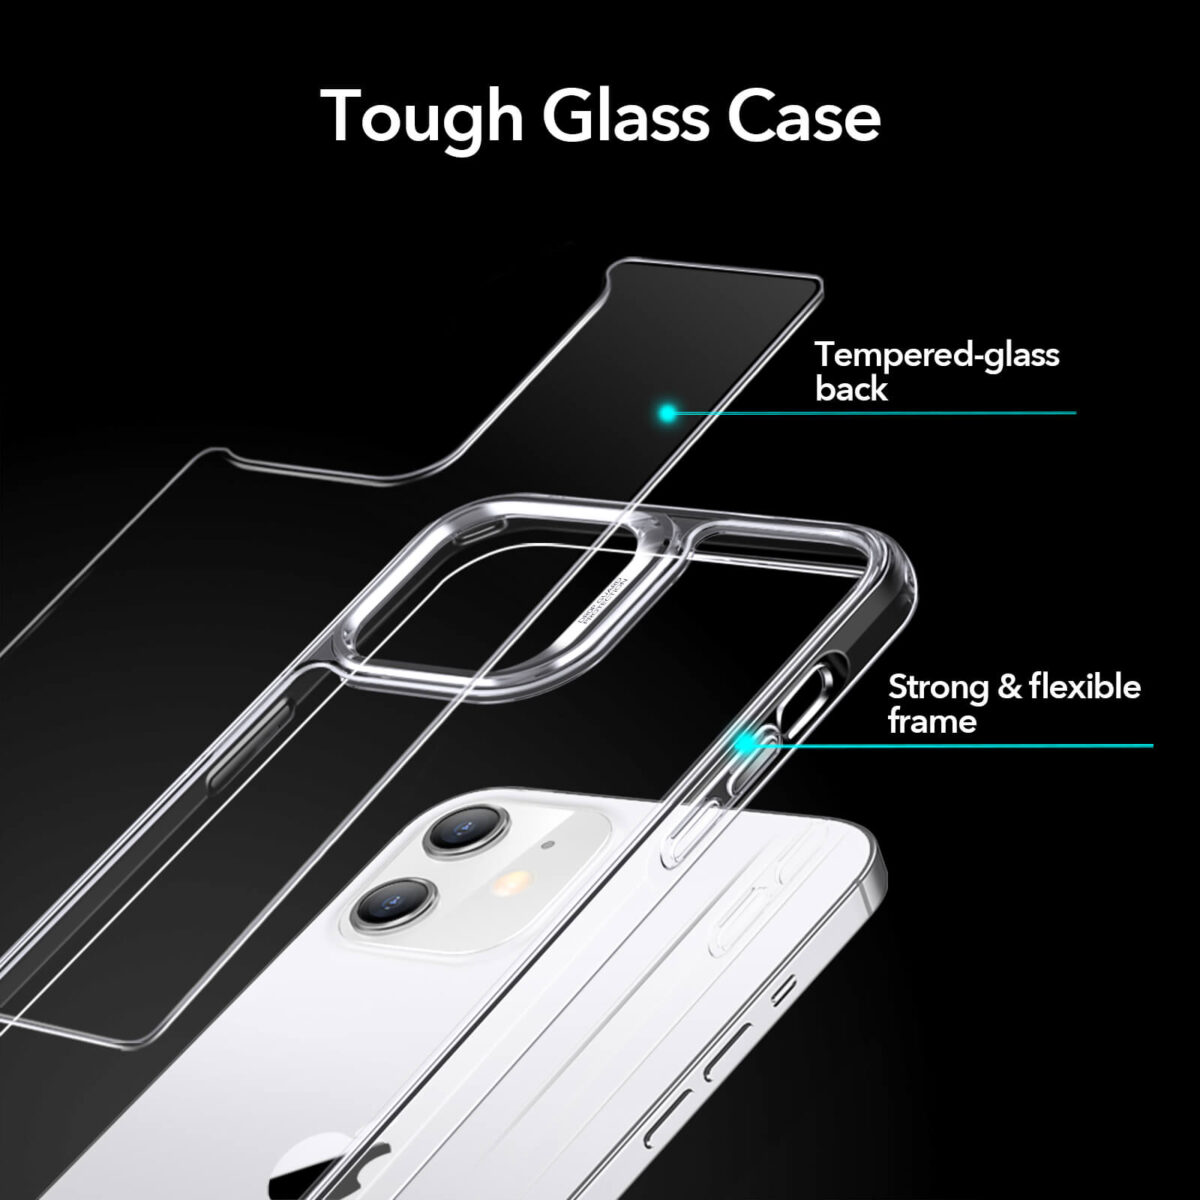 Strong and flexible frame with tough glass